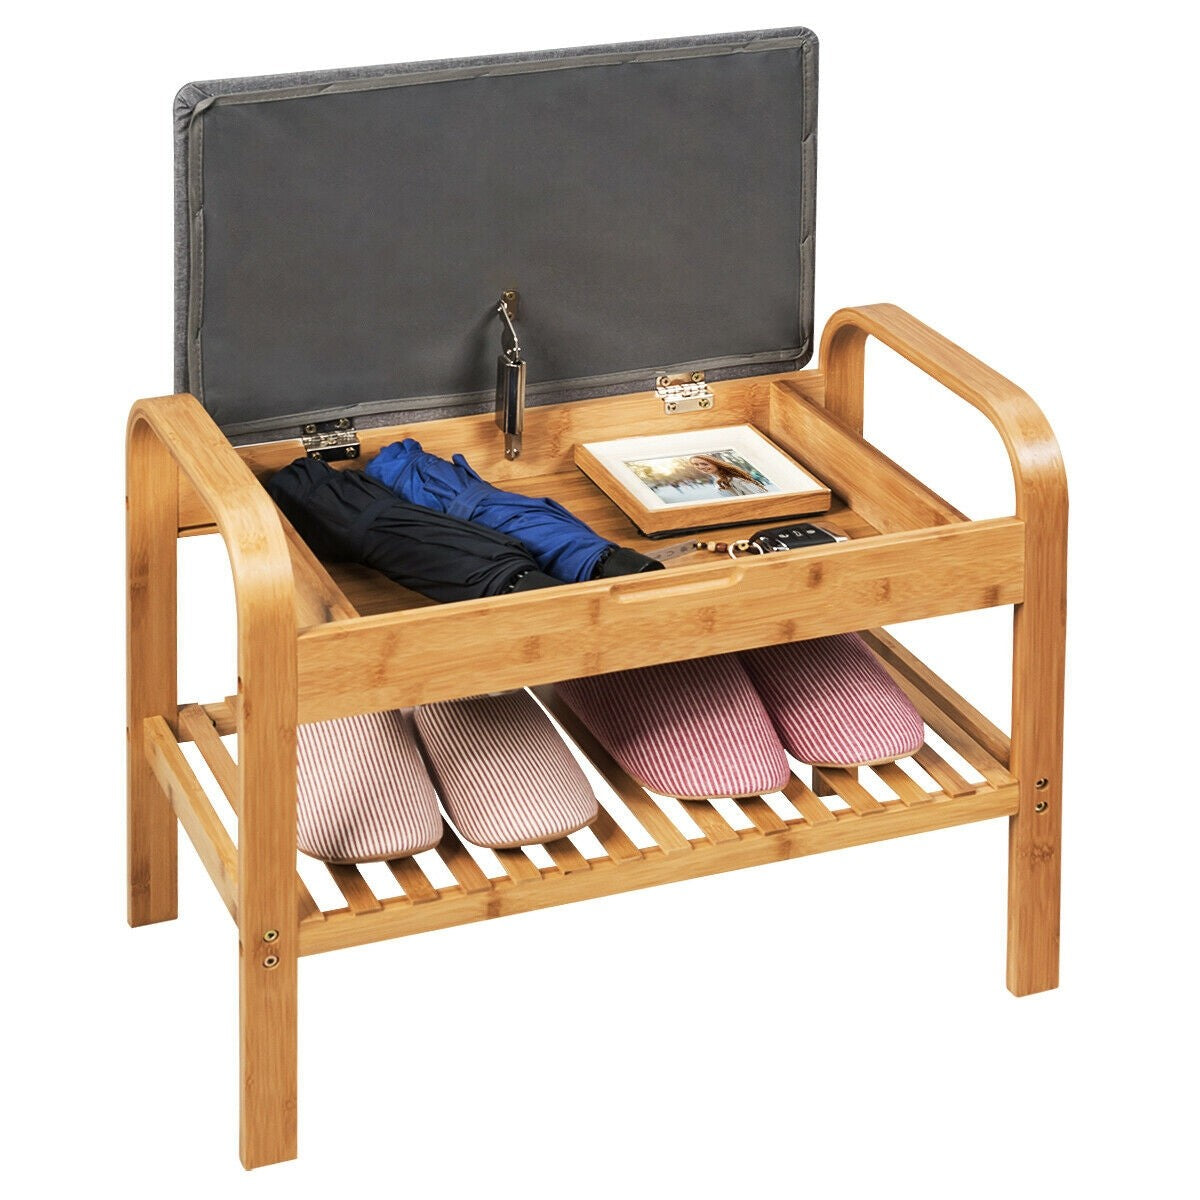 Giantex Shoe Rack Bench with Storage, Bamboo Storage Bench with Cushioned Seat, Holds Up to 330 LBS